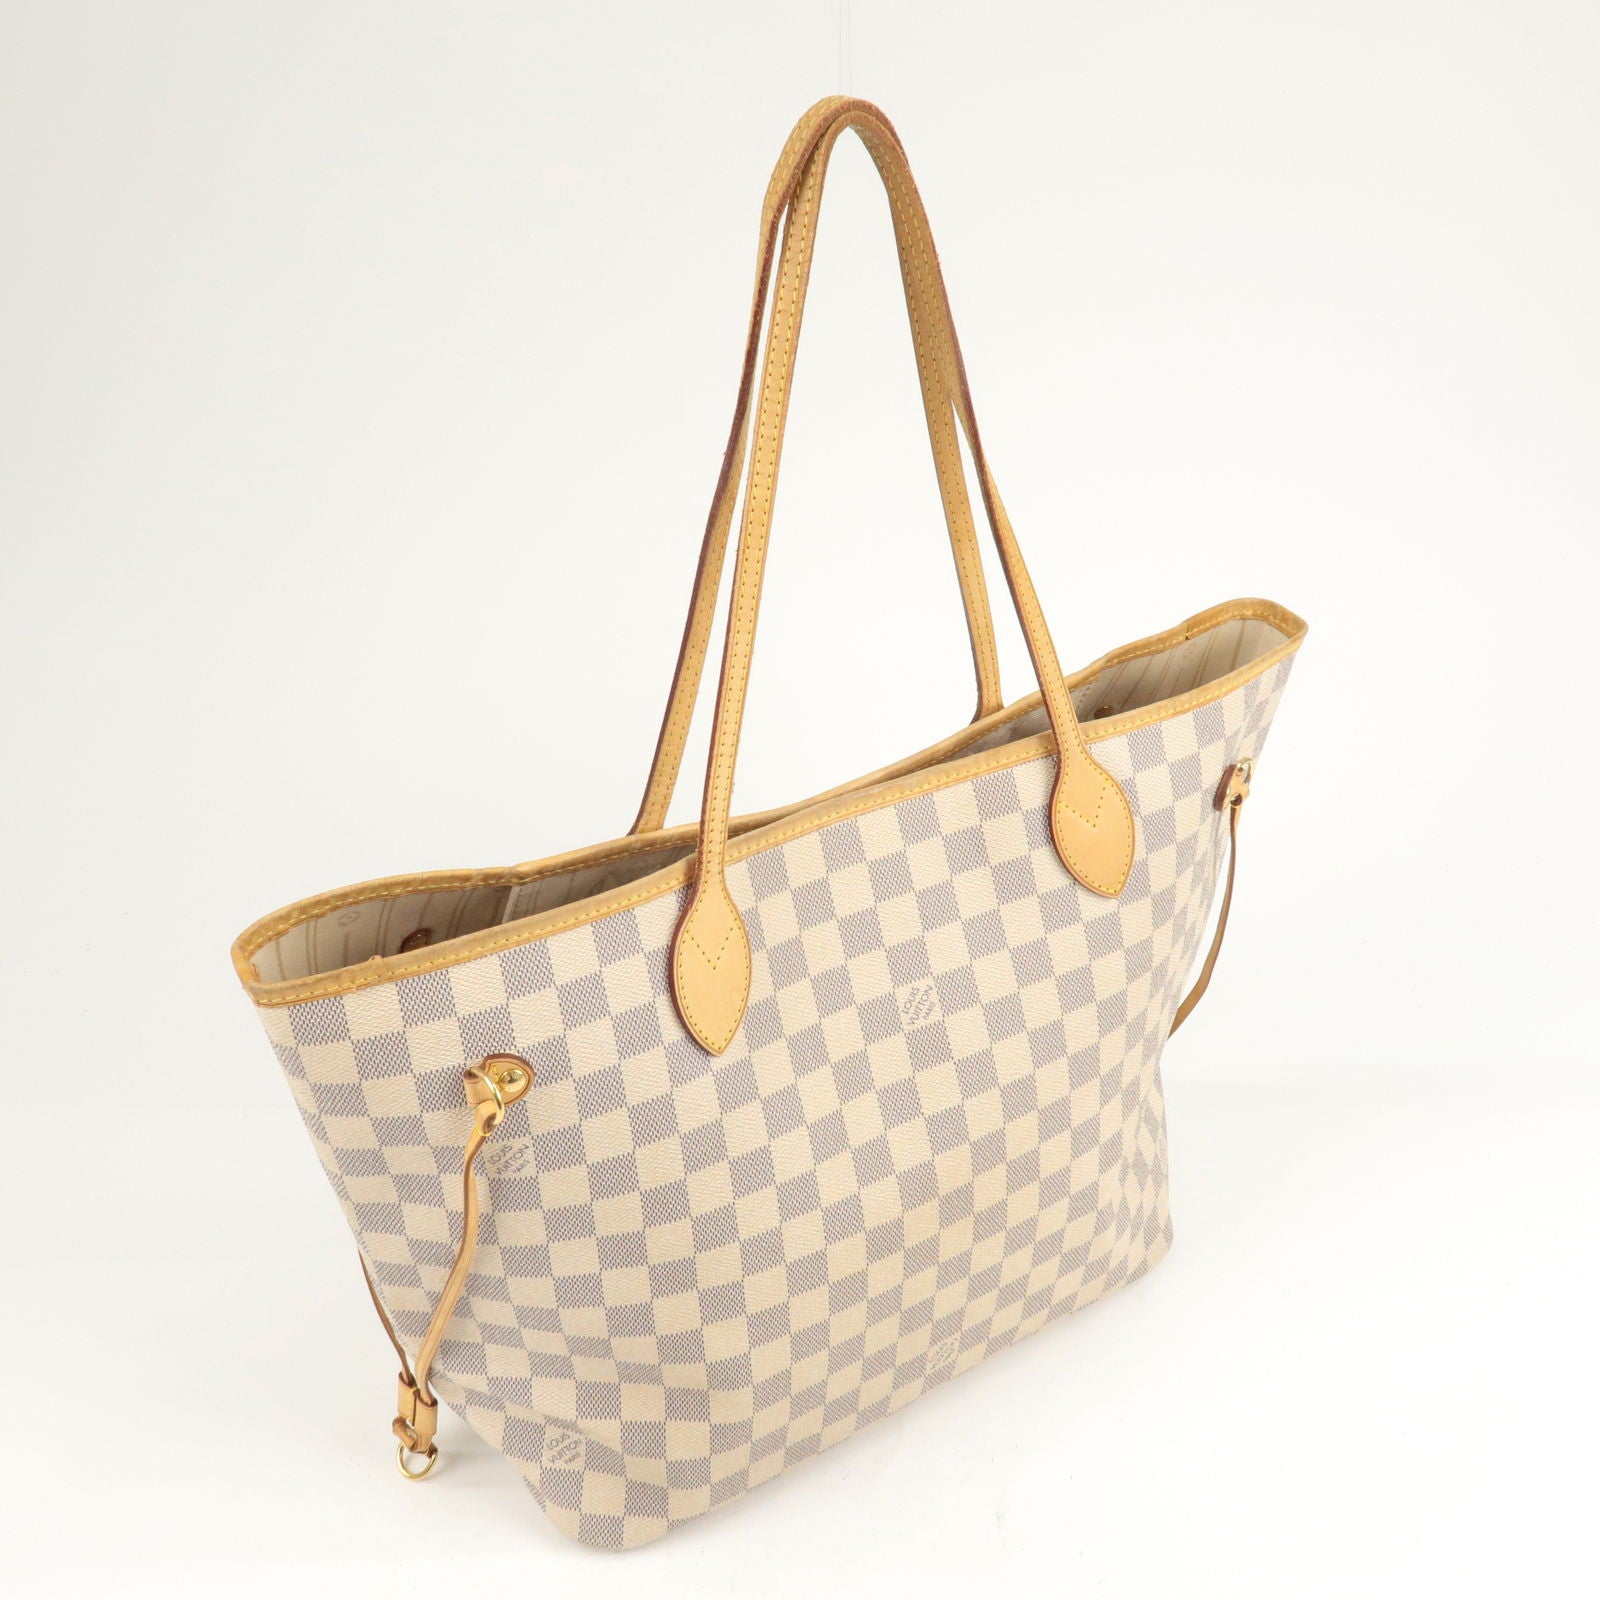 Pre-Owned Louis Vuitton Neverfull Damier Azur PM Tote Bag